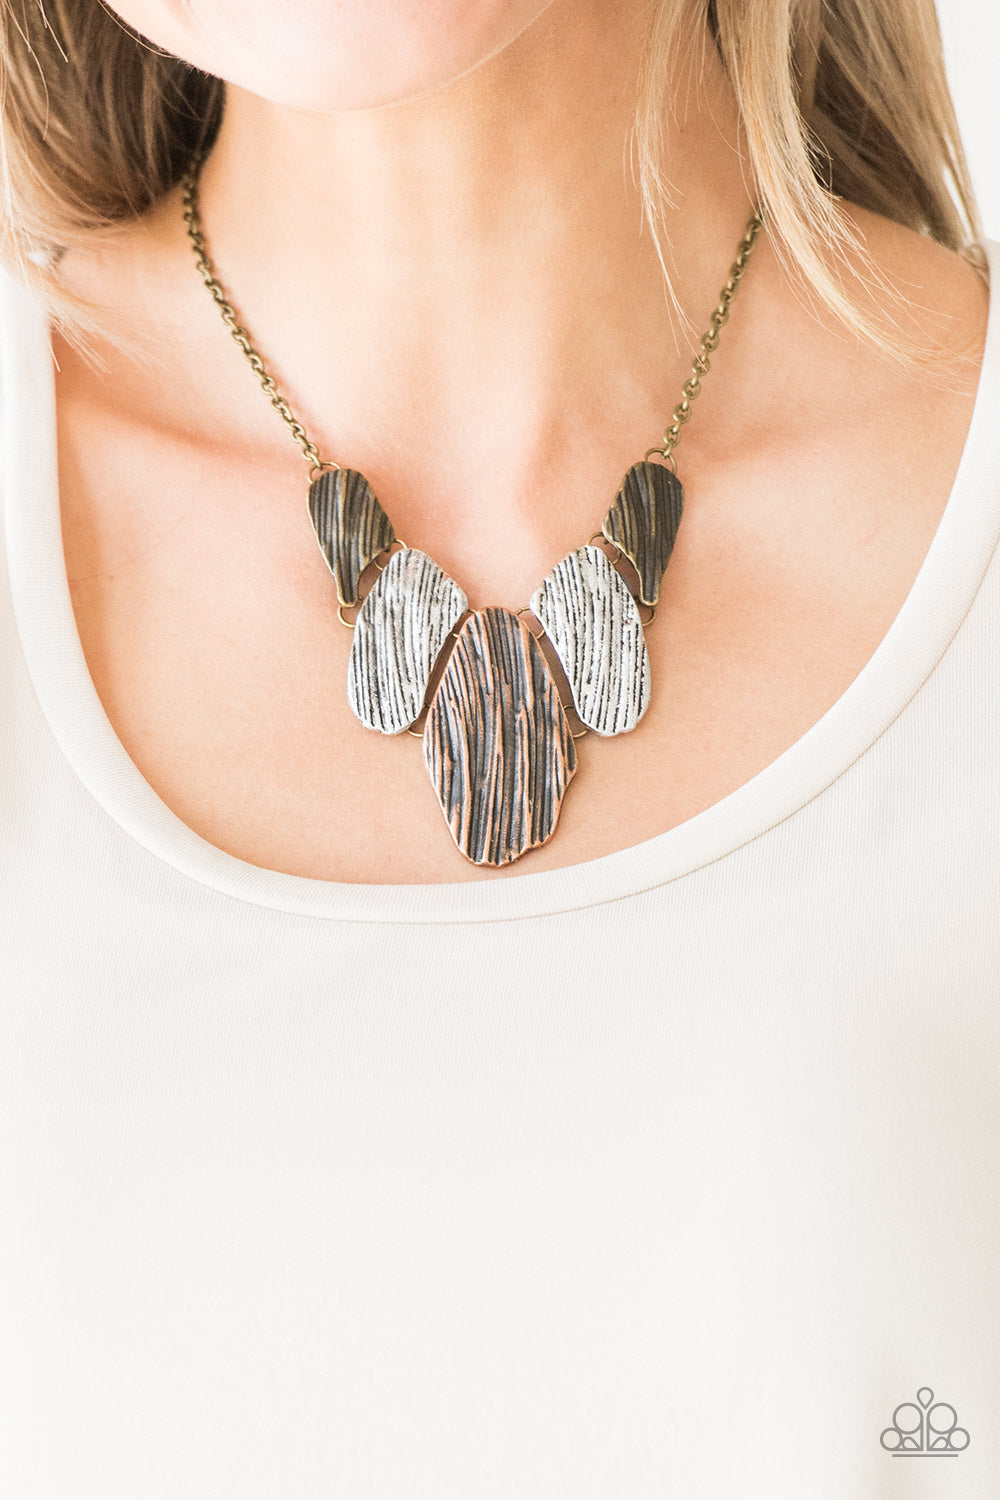 A New DISCovery Necklace - Multi